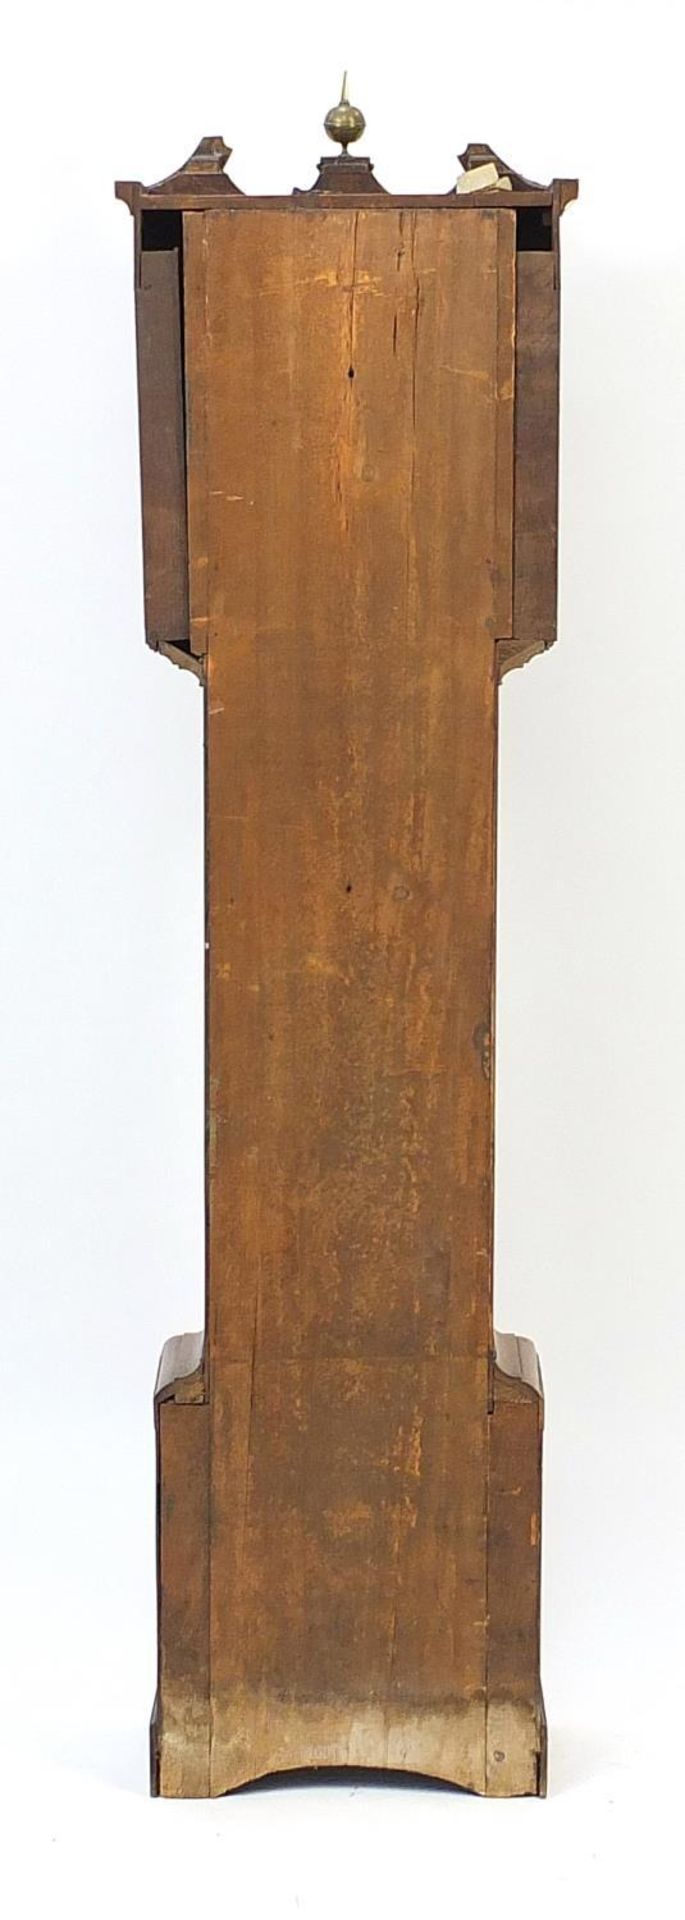 Early 19th century mahogany and oak longcase clock with brass face and subsidiary dial, the circular - Image 6 of 9